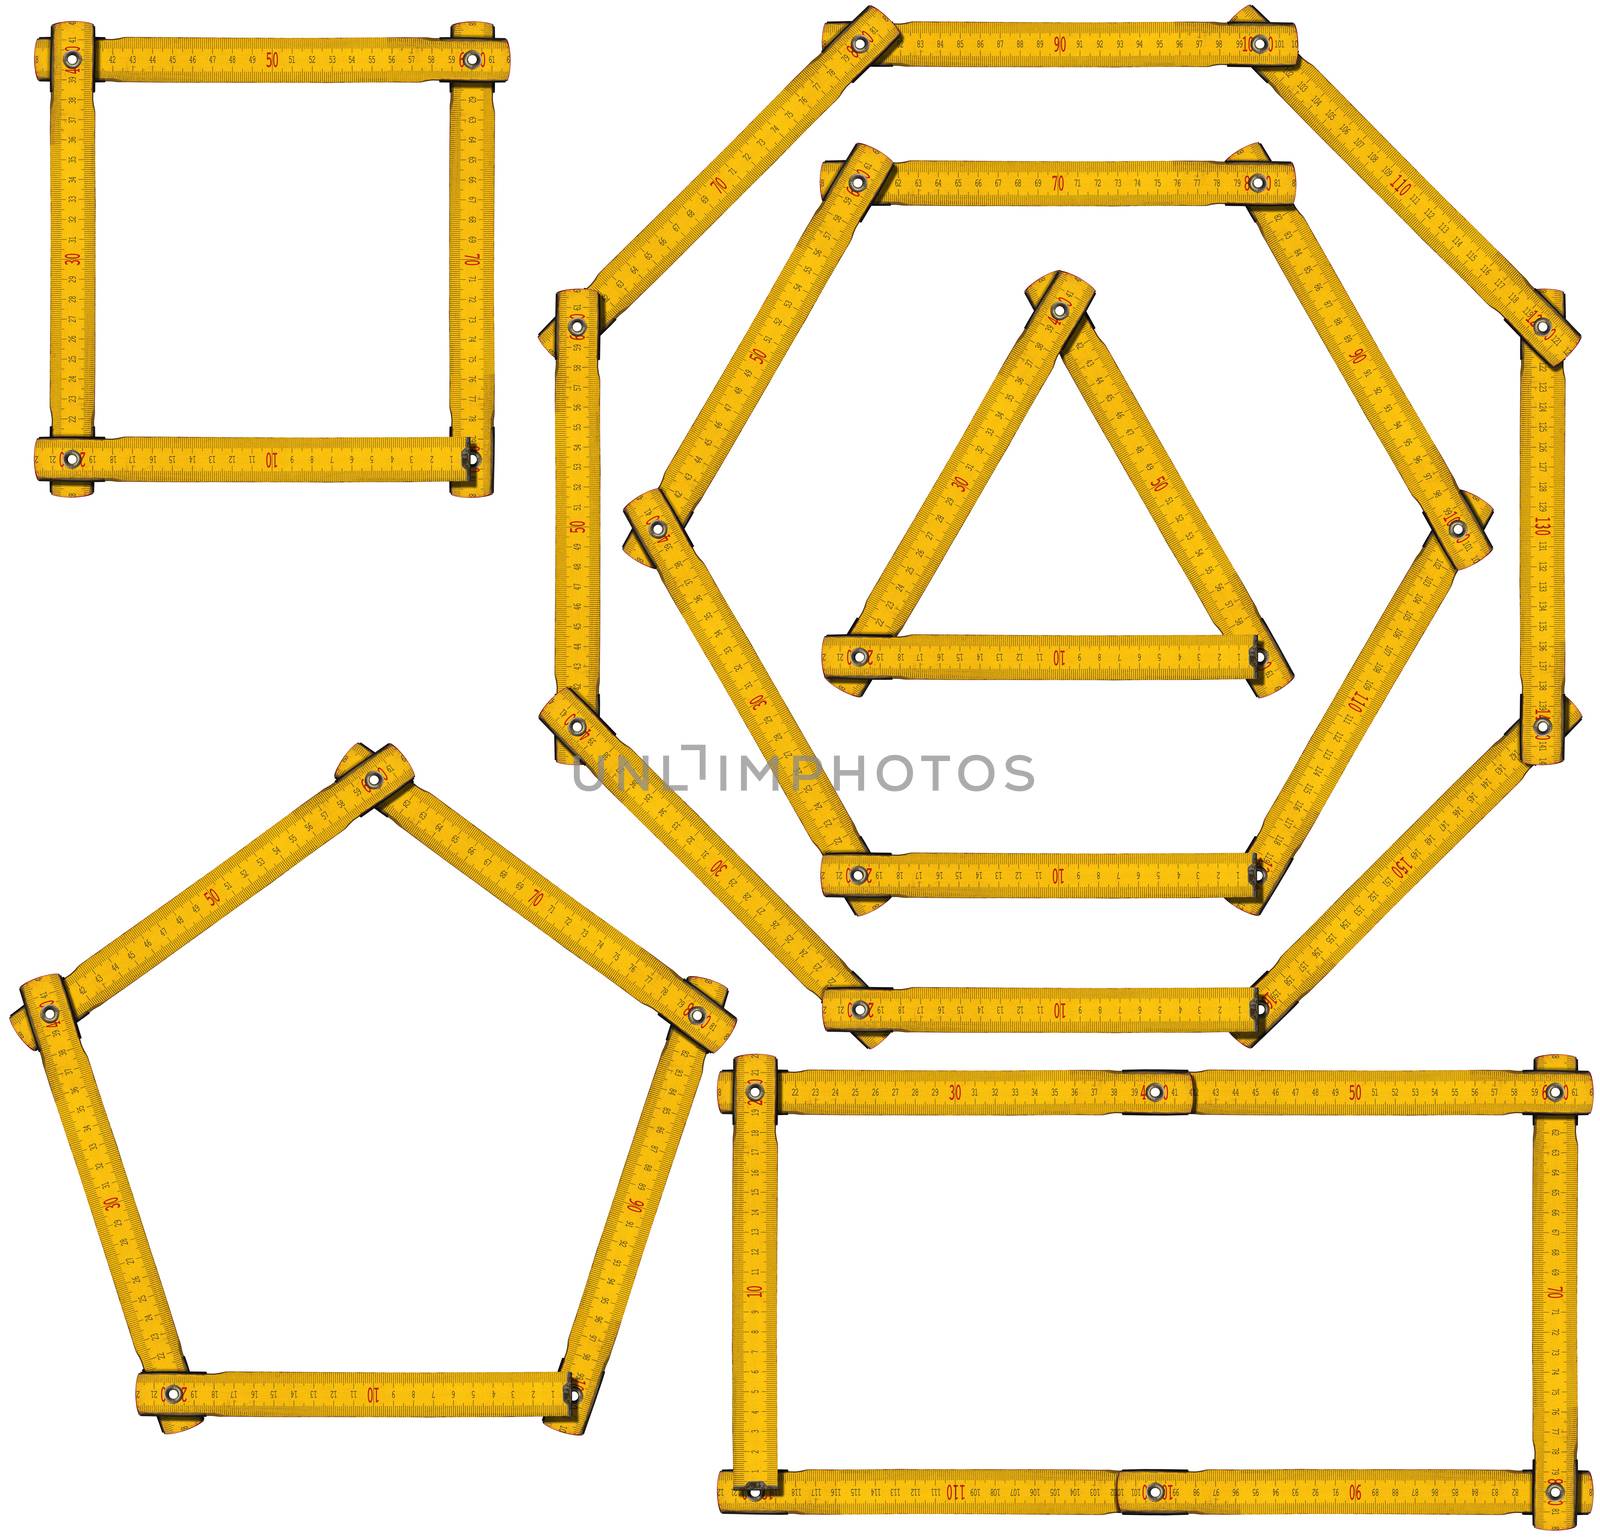 Collection of basic geometric shapes with wooden ruler, triangle, rectangle, square, pentagon, hexagon and octagon. Isolated on white background